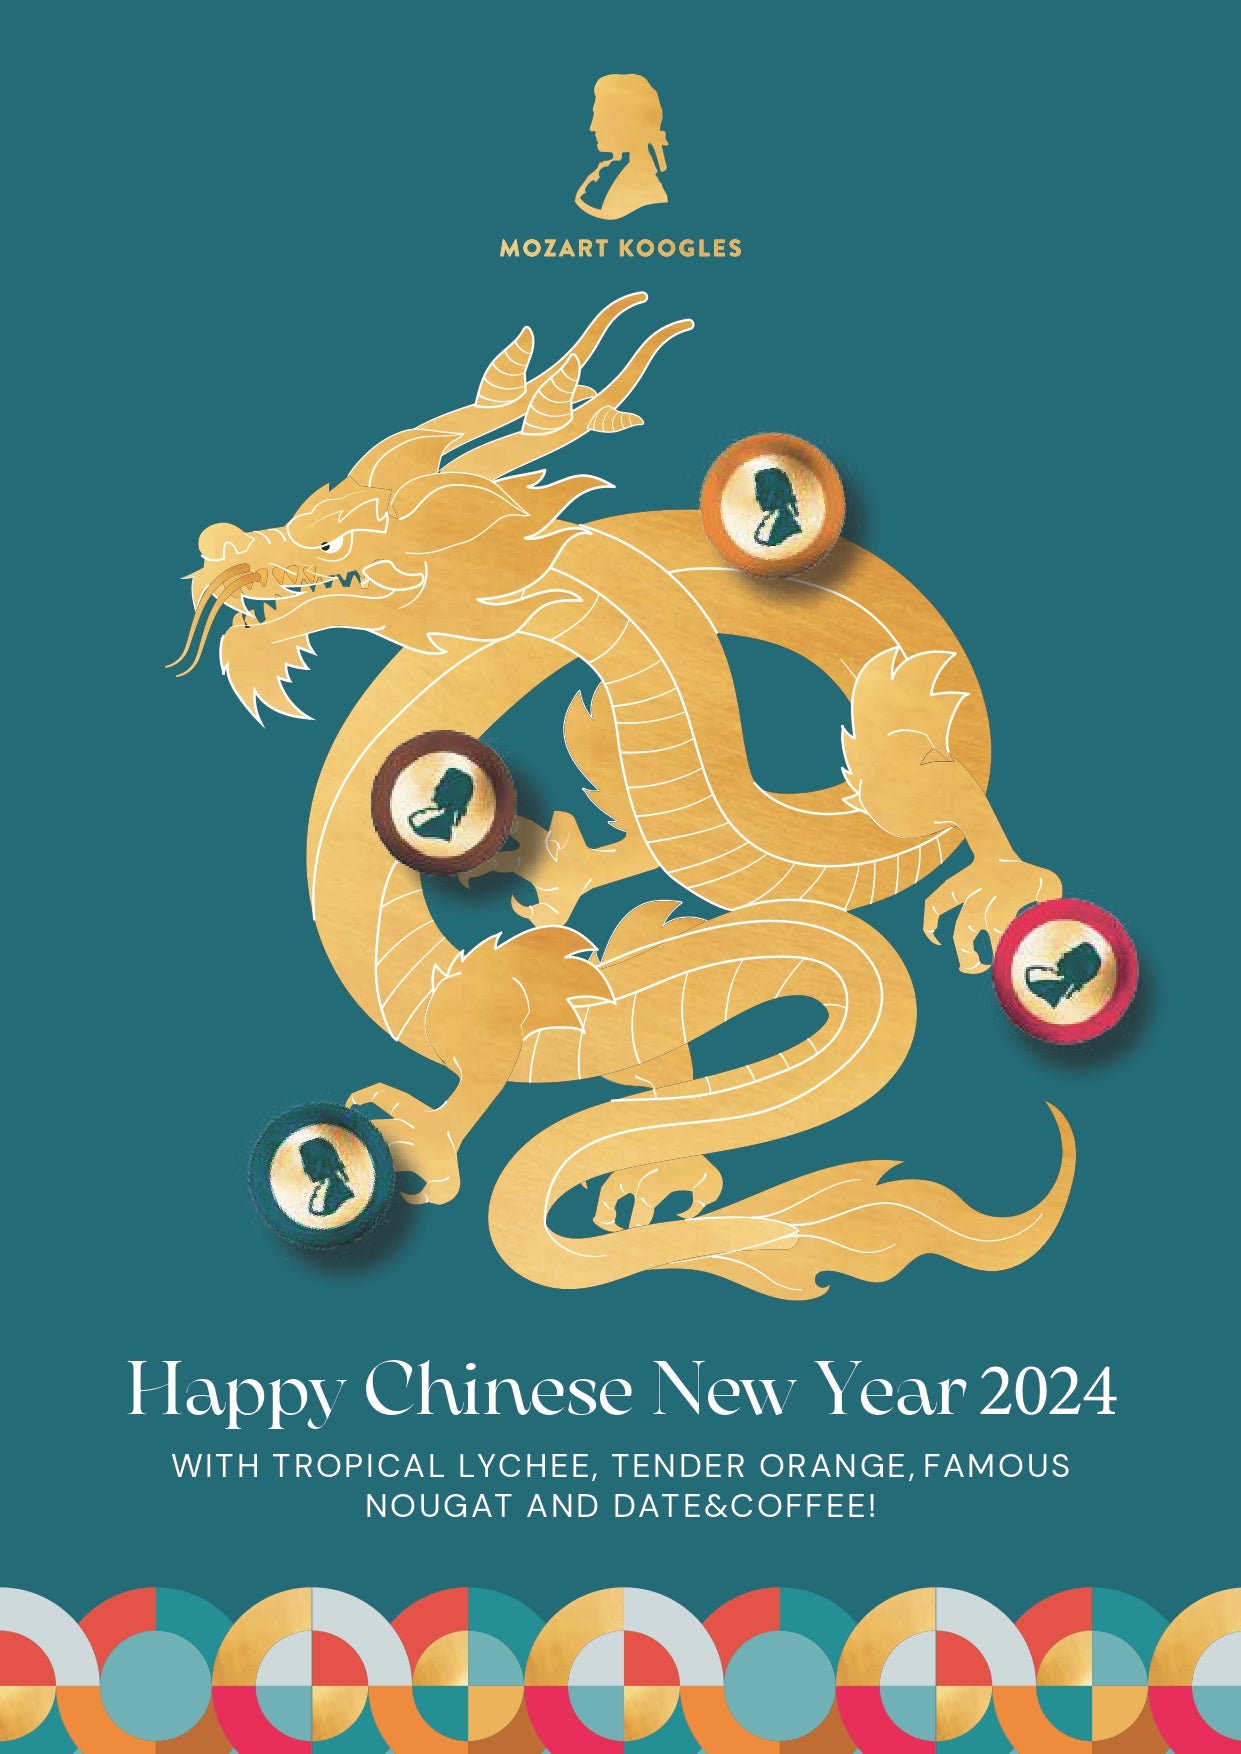 MK 3 Pager - Chinese New Year_compressed_page-0001.jpg__PID:840fde47-1393-4acf-83fa-350c77dc2fa2